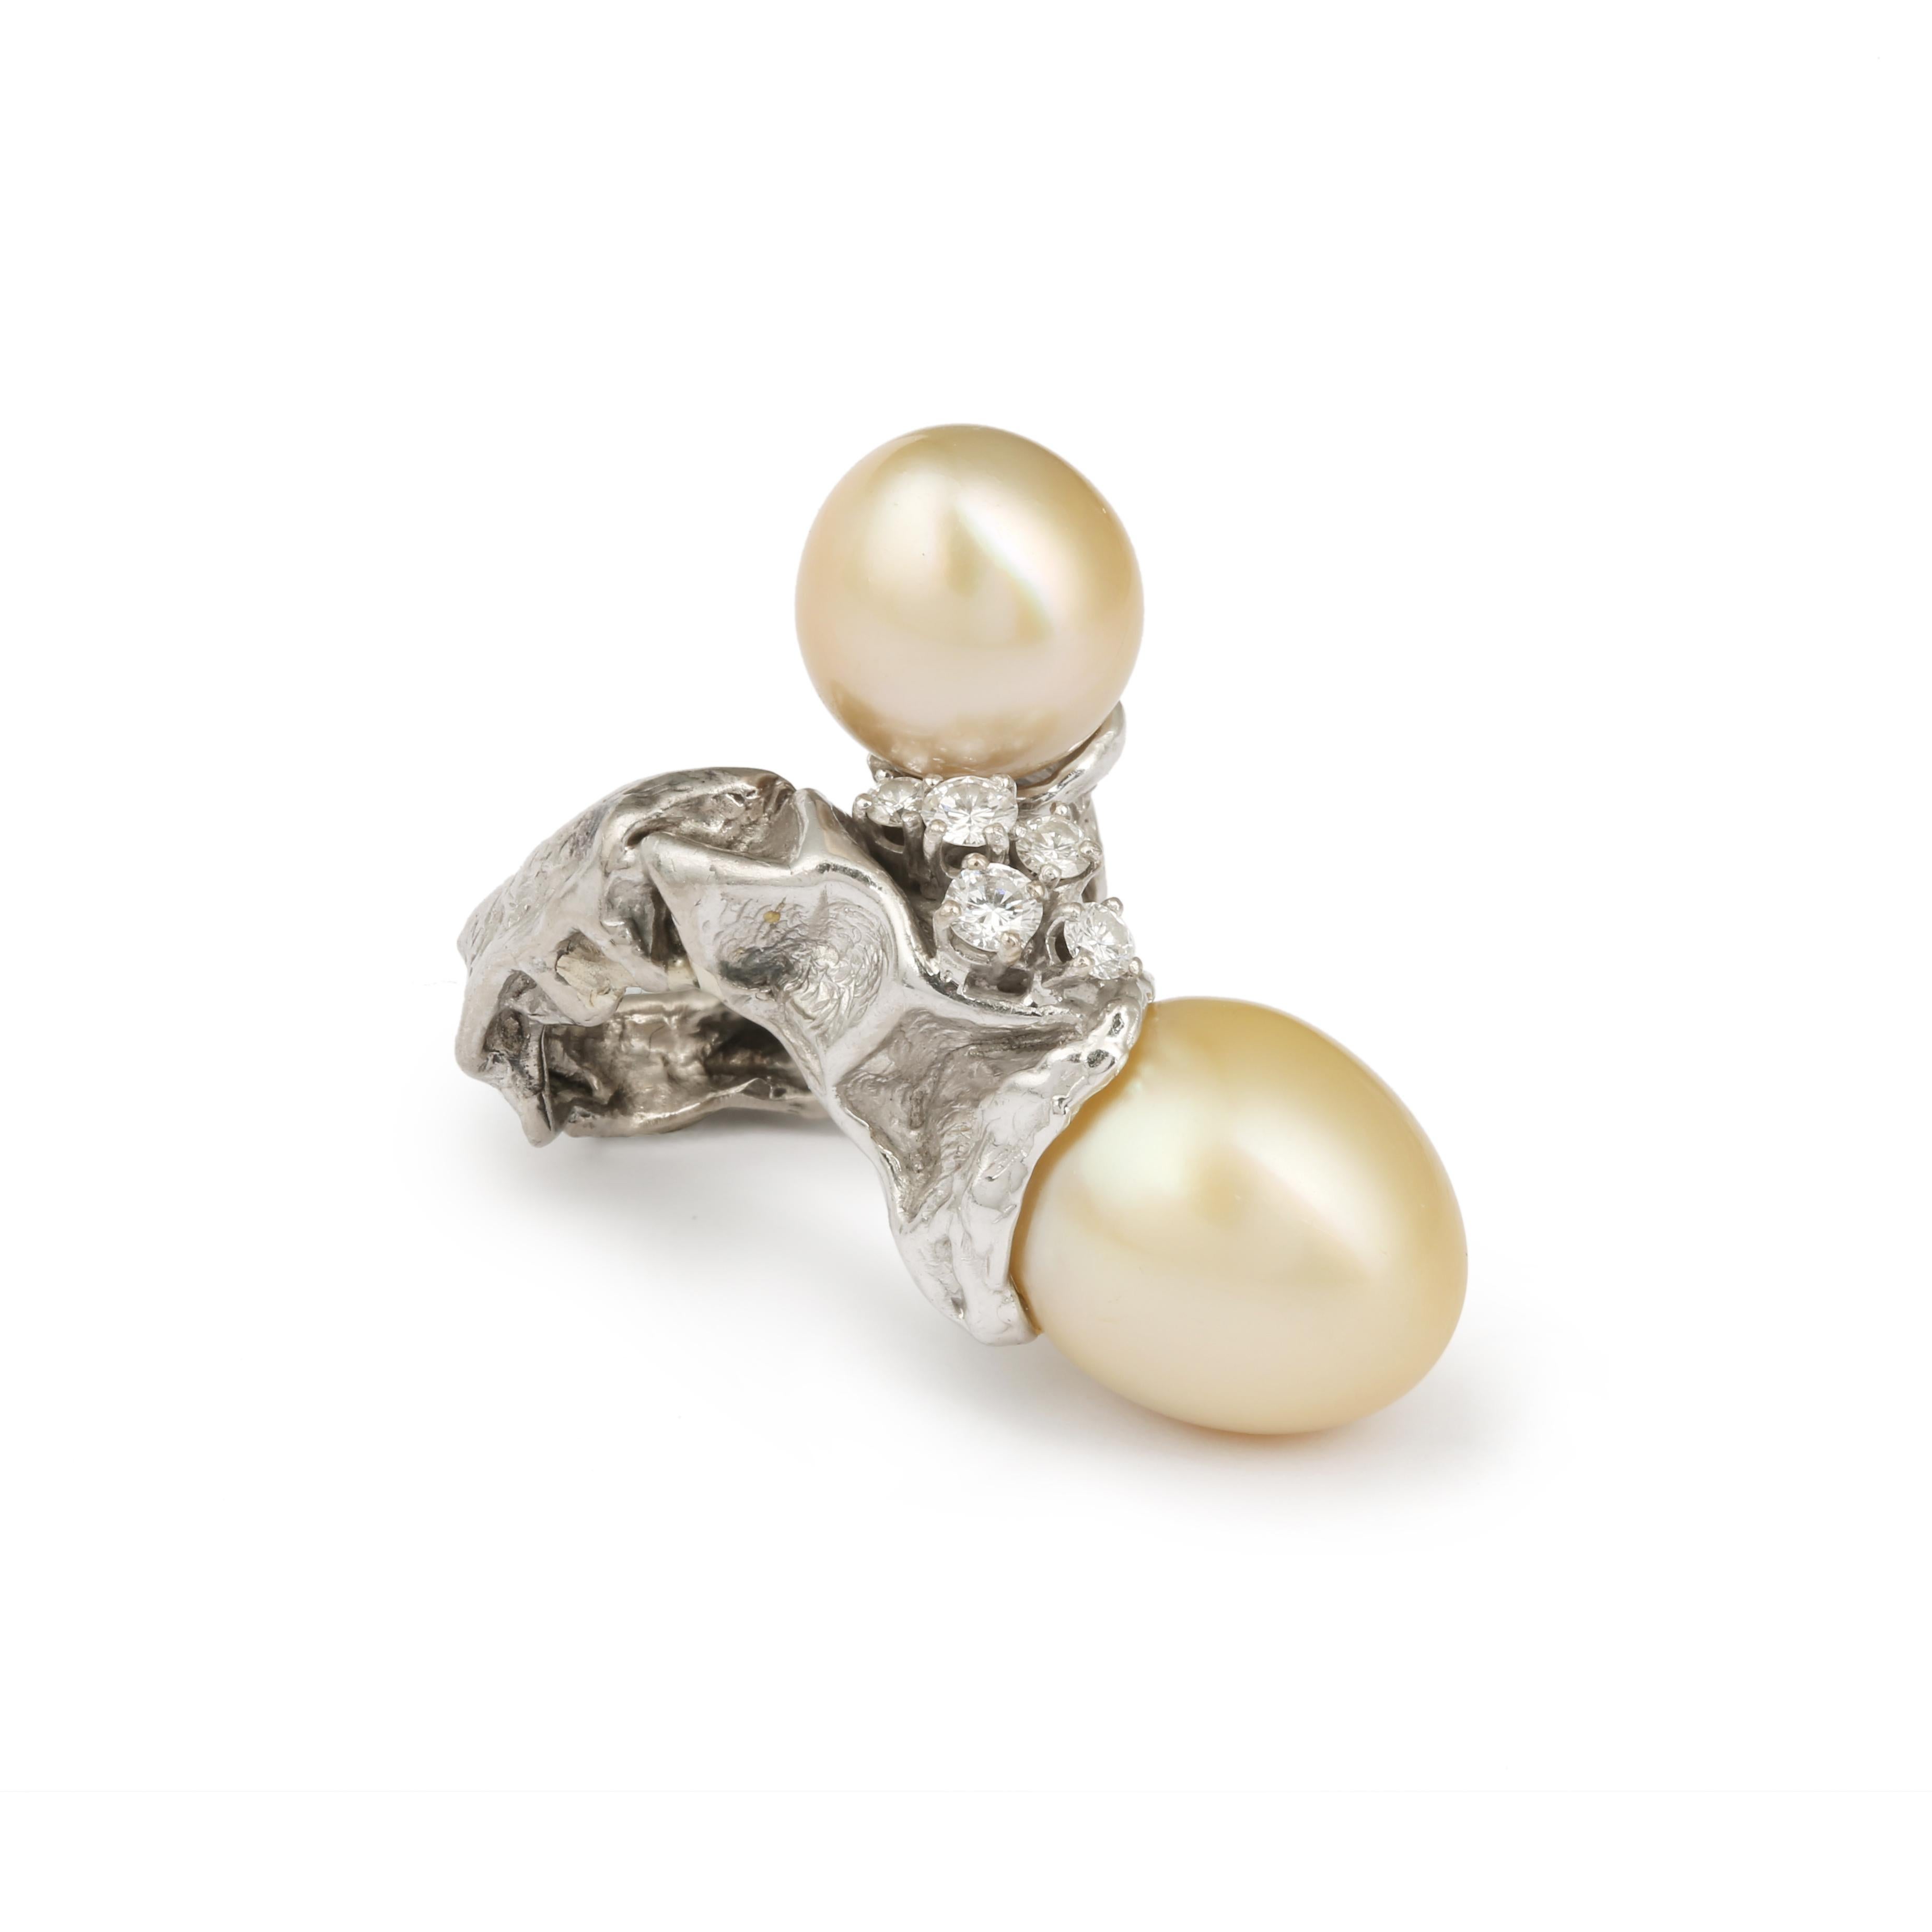 Important toi et moi ring in textured white gold set with ovoid golden pearls and paved with diamonds.

Diameter of the largest pearl: 14.37 mm (0.566 inches)

Estimated total diamond weight: 0.50 carats

Ring dimensions: 22.5 x 36.28 x 16.81 mm